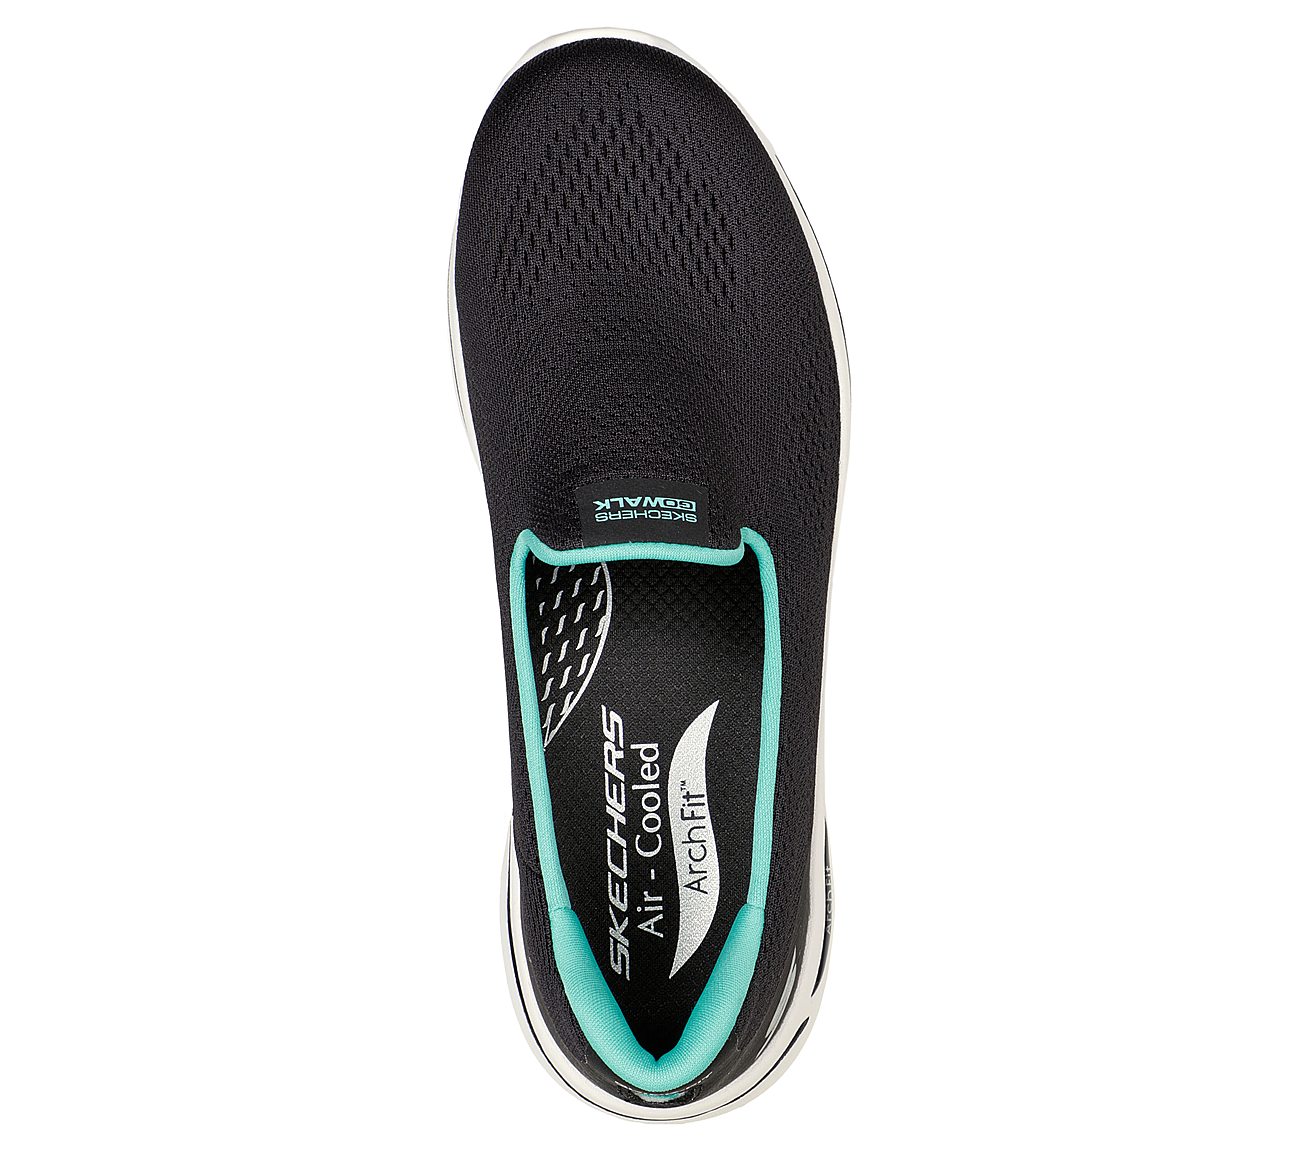 GO WALK ARCH FIT - IMAGINED, BLACK/TURQUOISE Footwear Top View